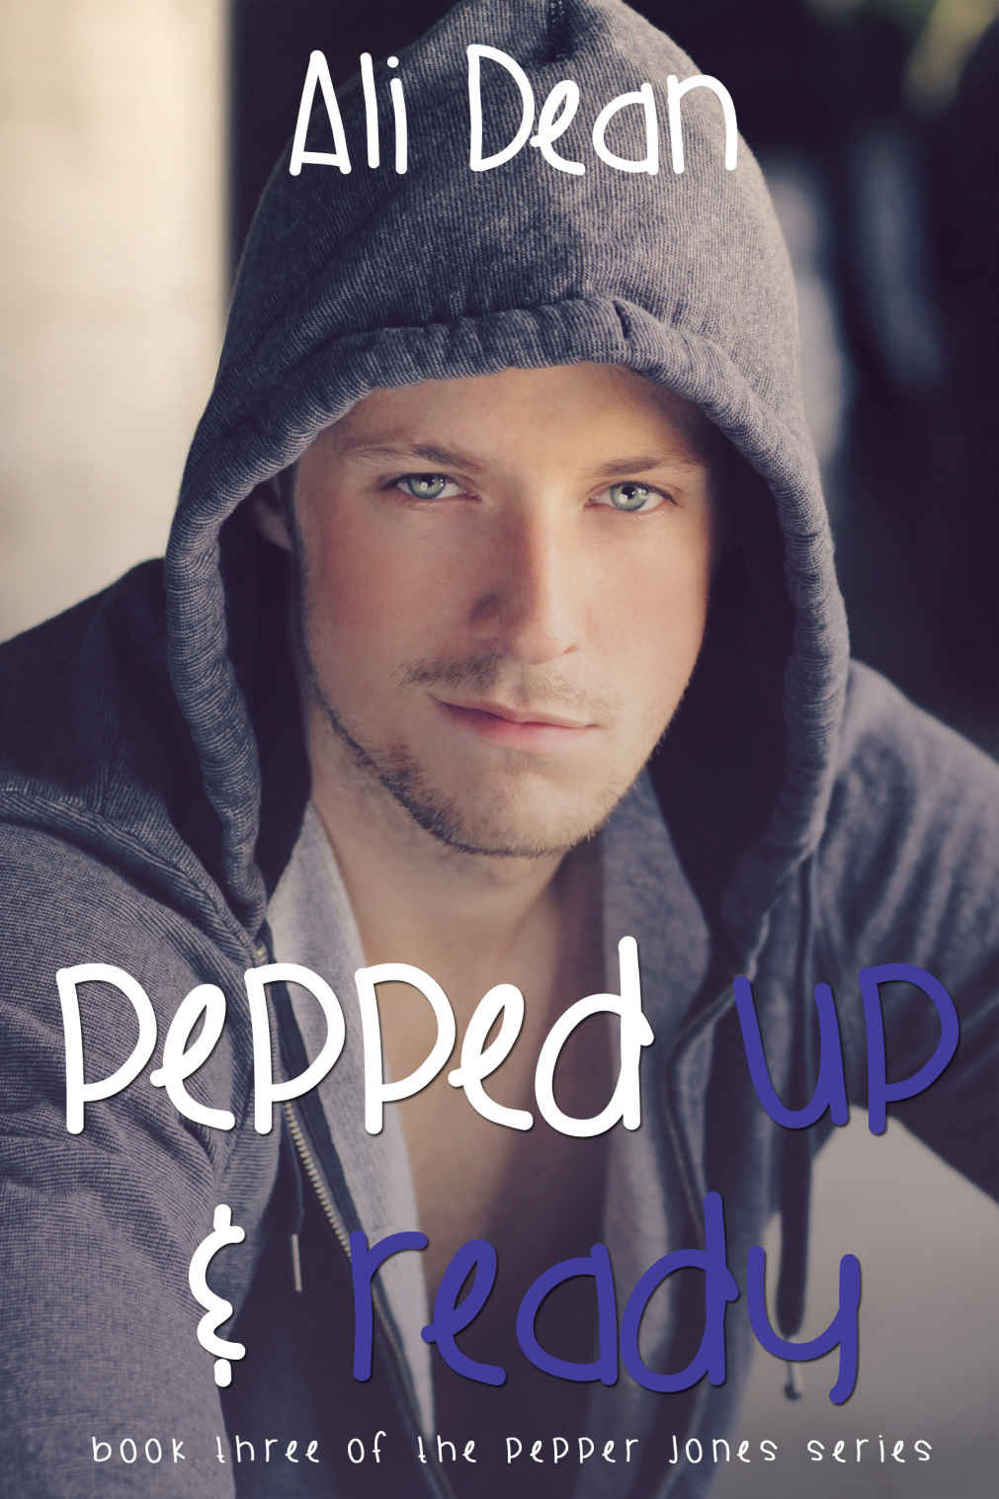 Pepped Up and Ready (Pepper Jones #3) by Ali Dean